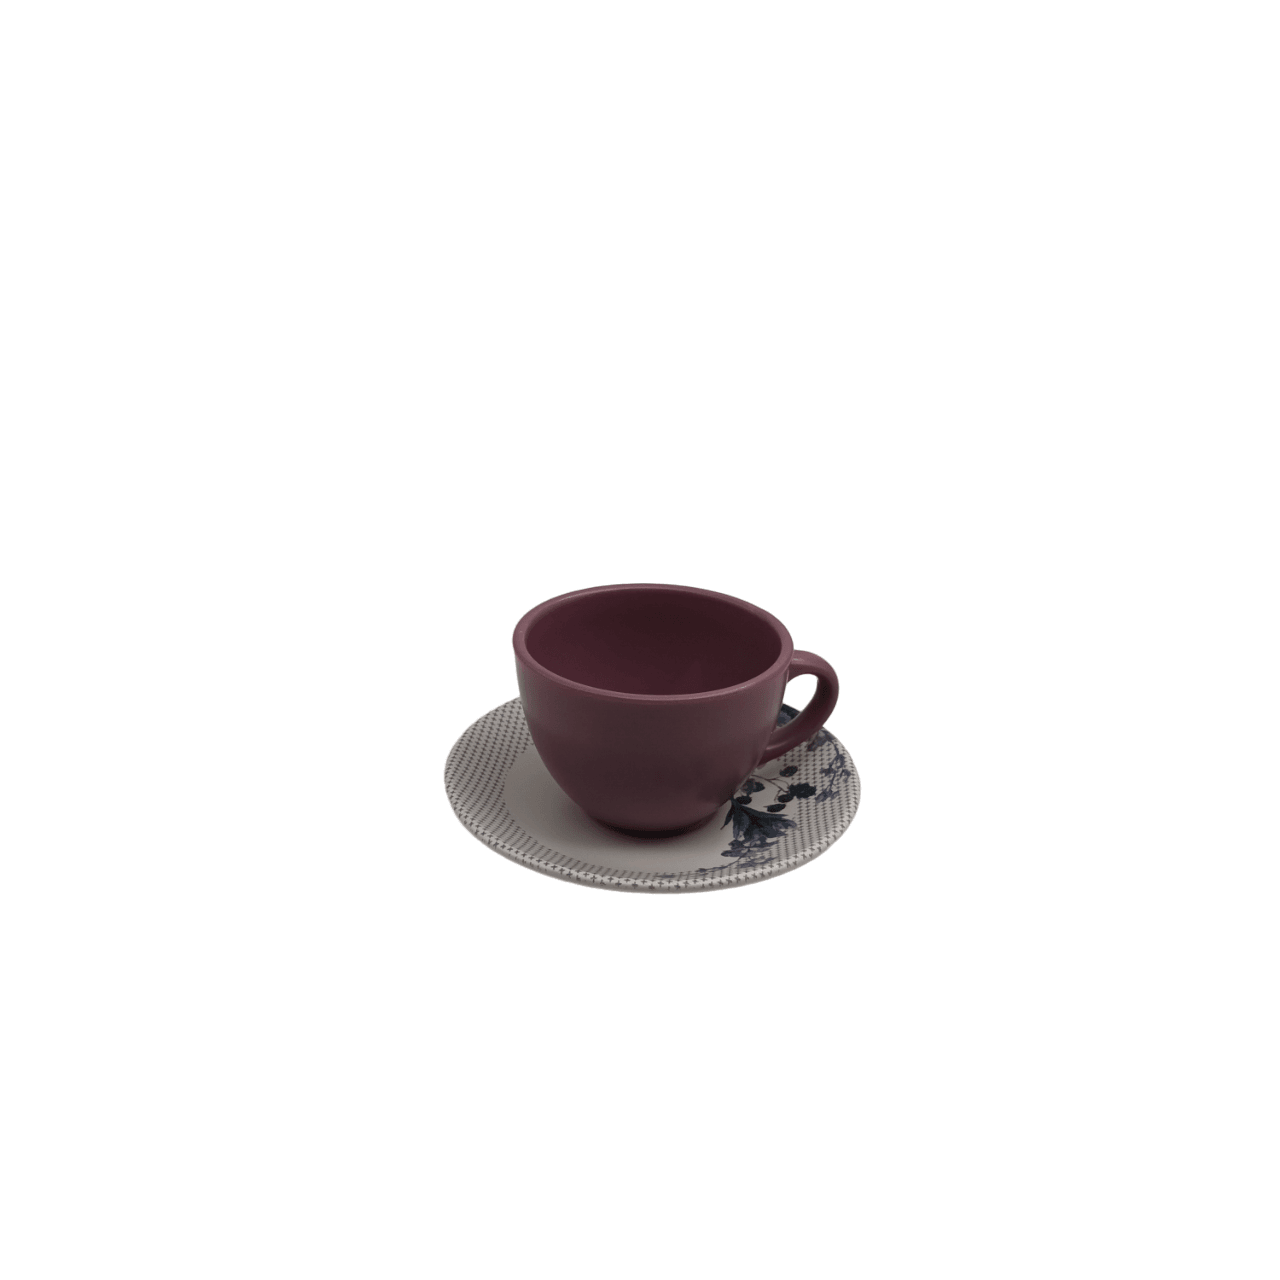 12pc Teacup & Saucer Set - Home And Trends